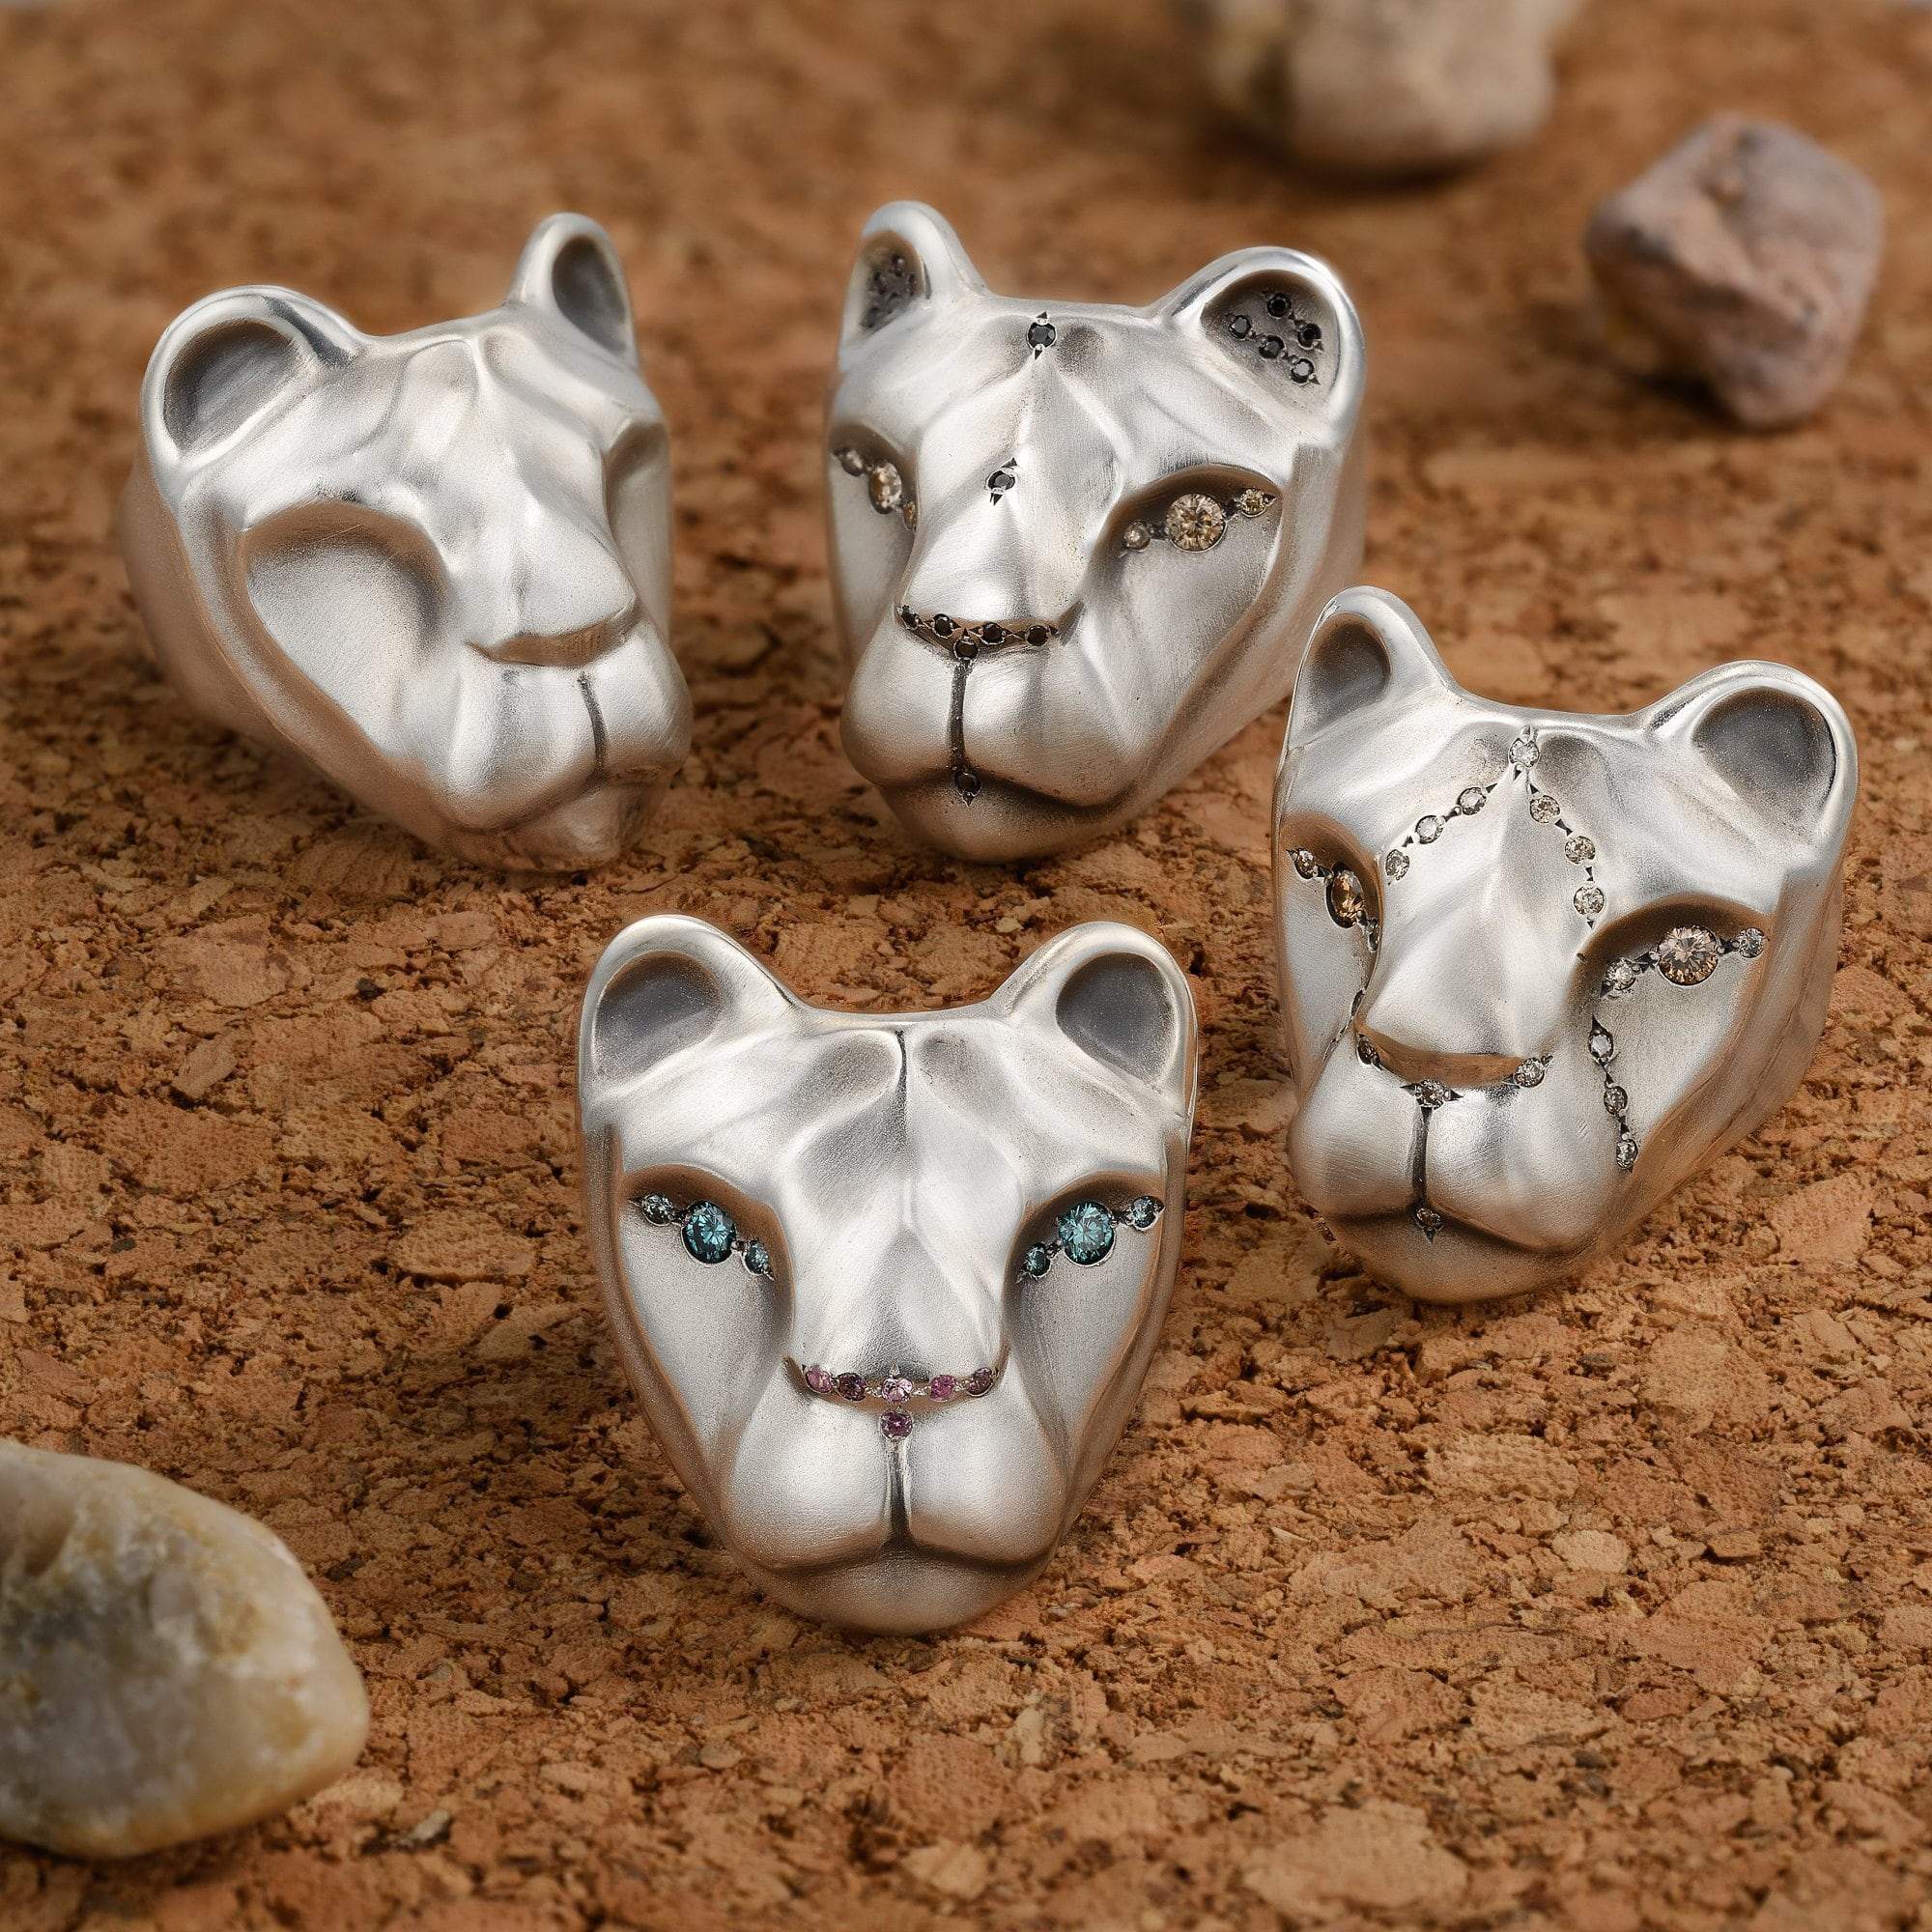 ELINA GLEIZER Rings White Lioness Ring with Royal Diamonds setting